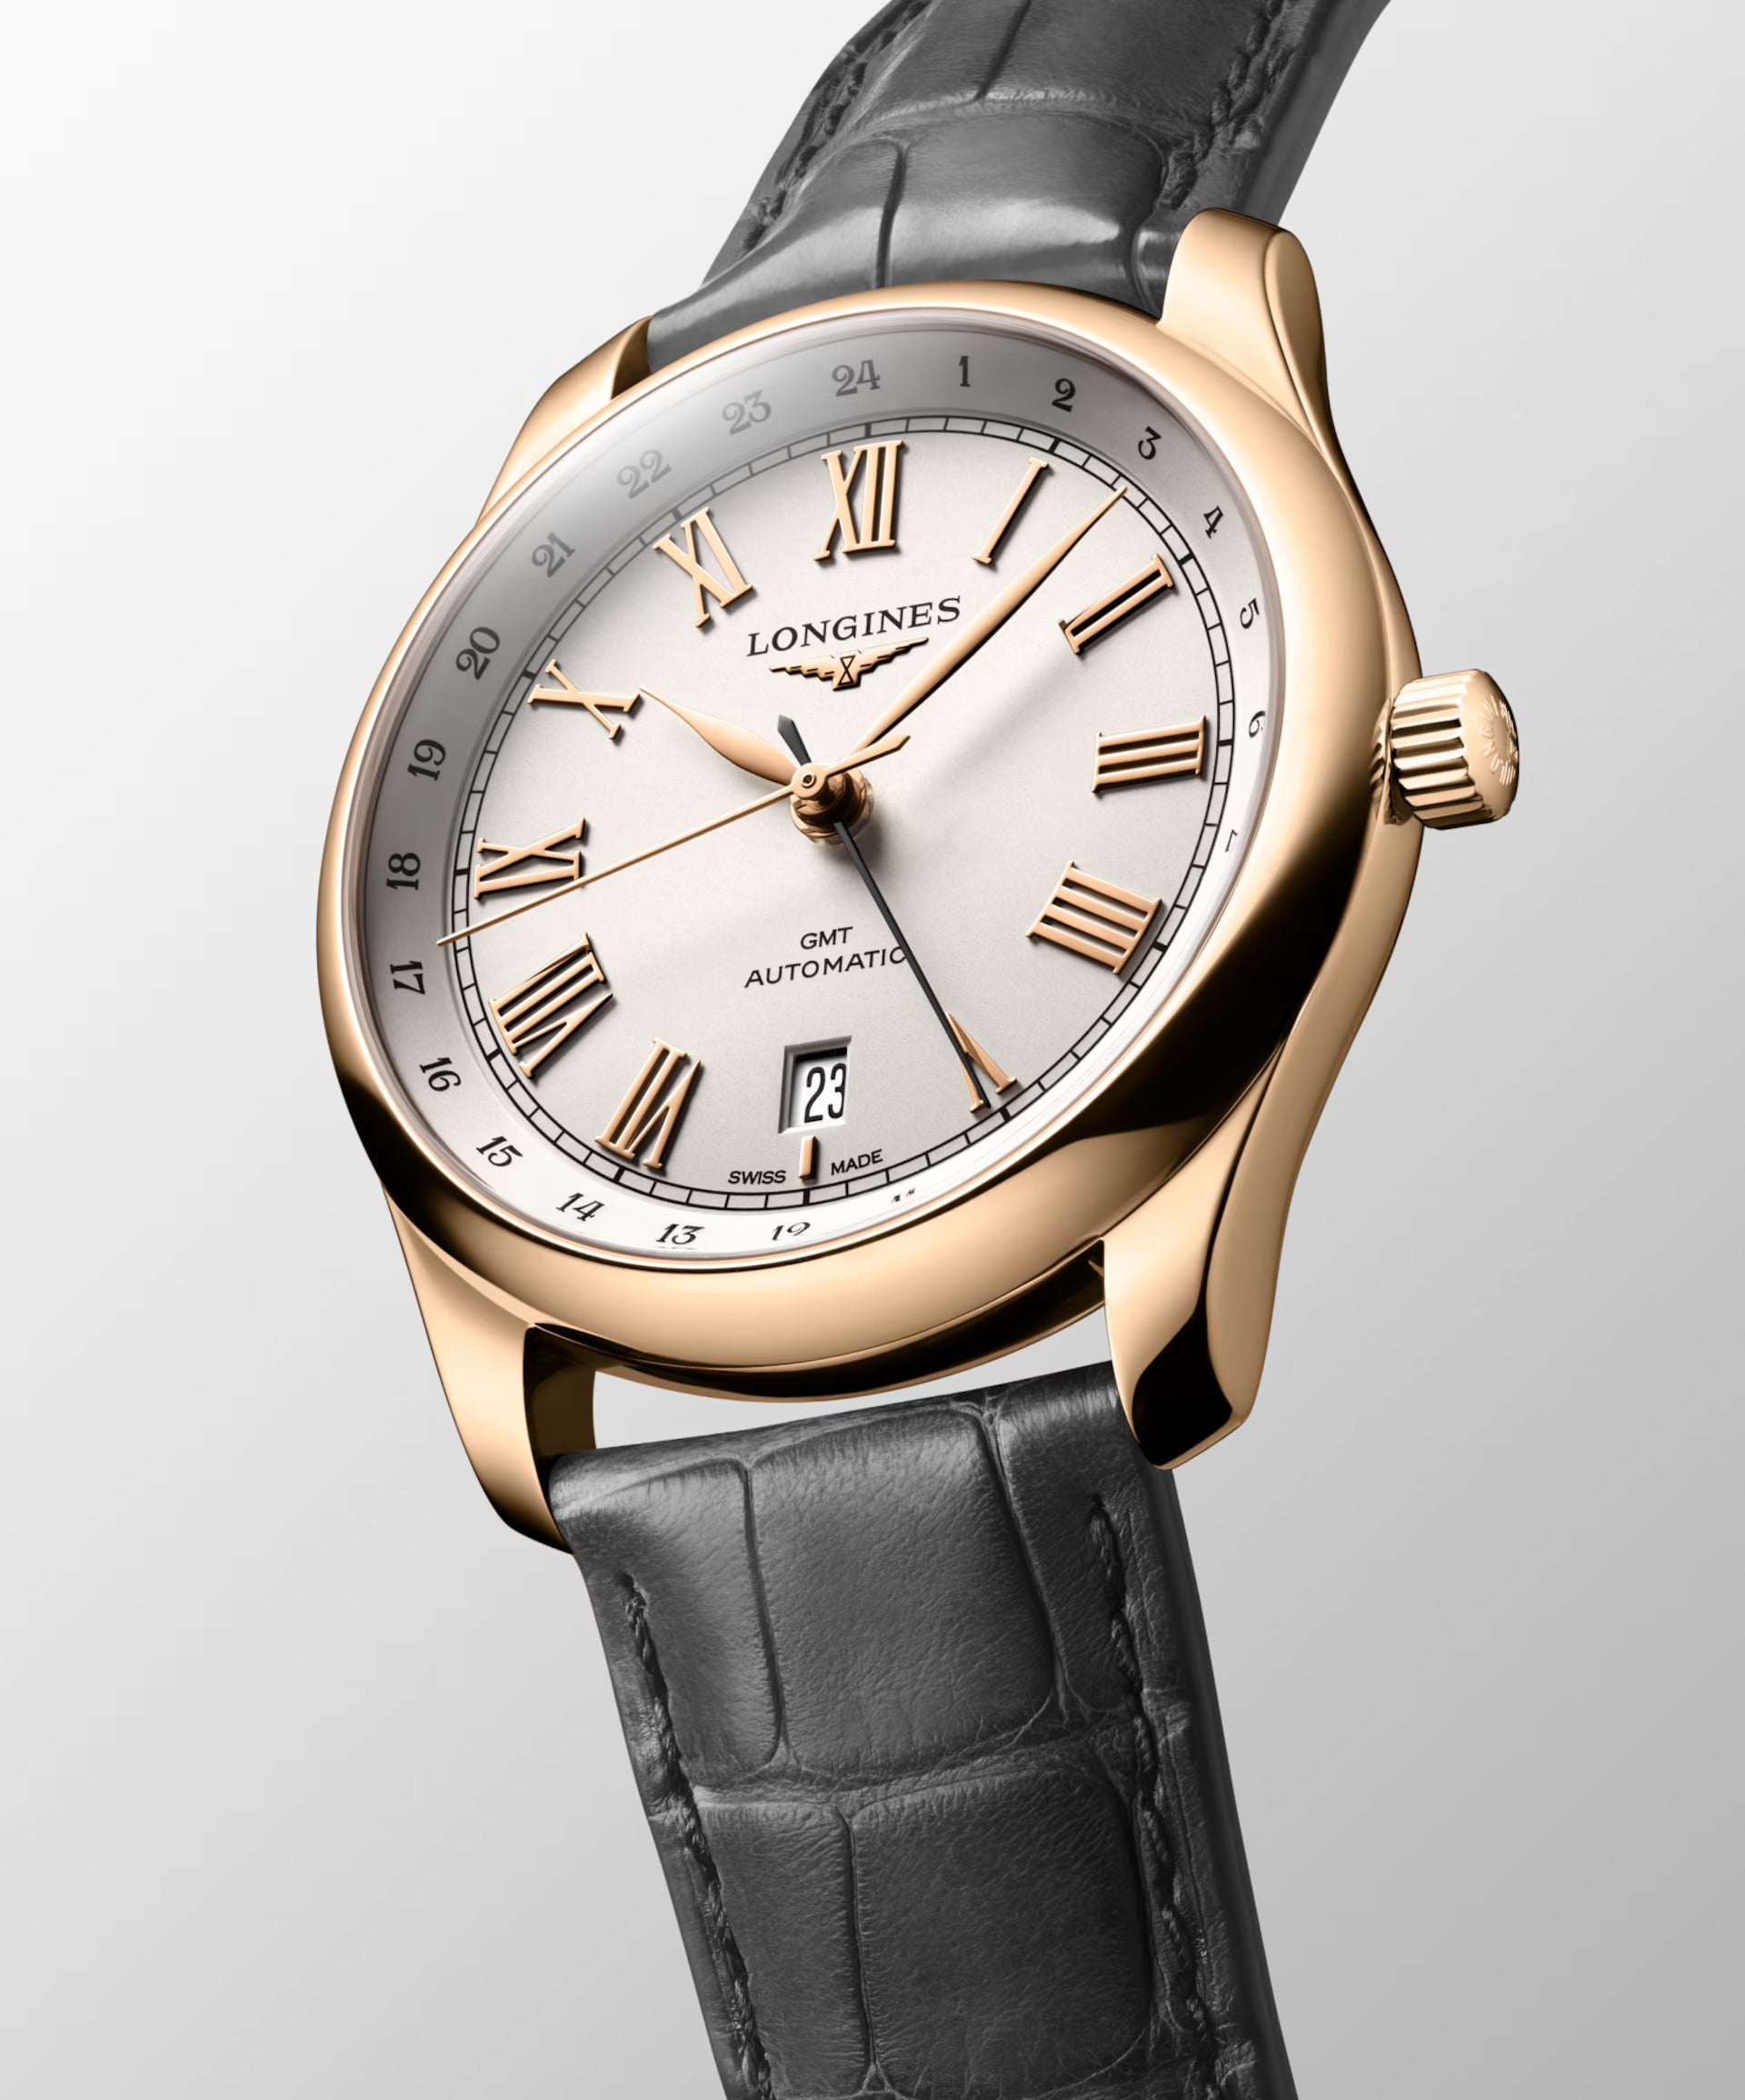 THE LONGINES MASTER COLLECTION GMT "LIMITED TO 500 PIECES"